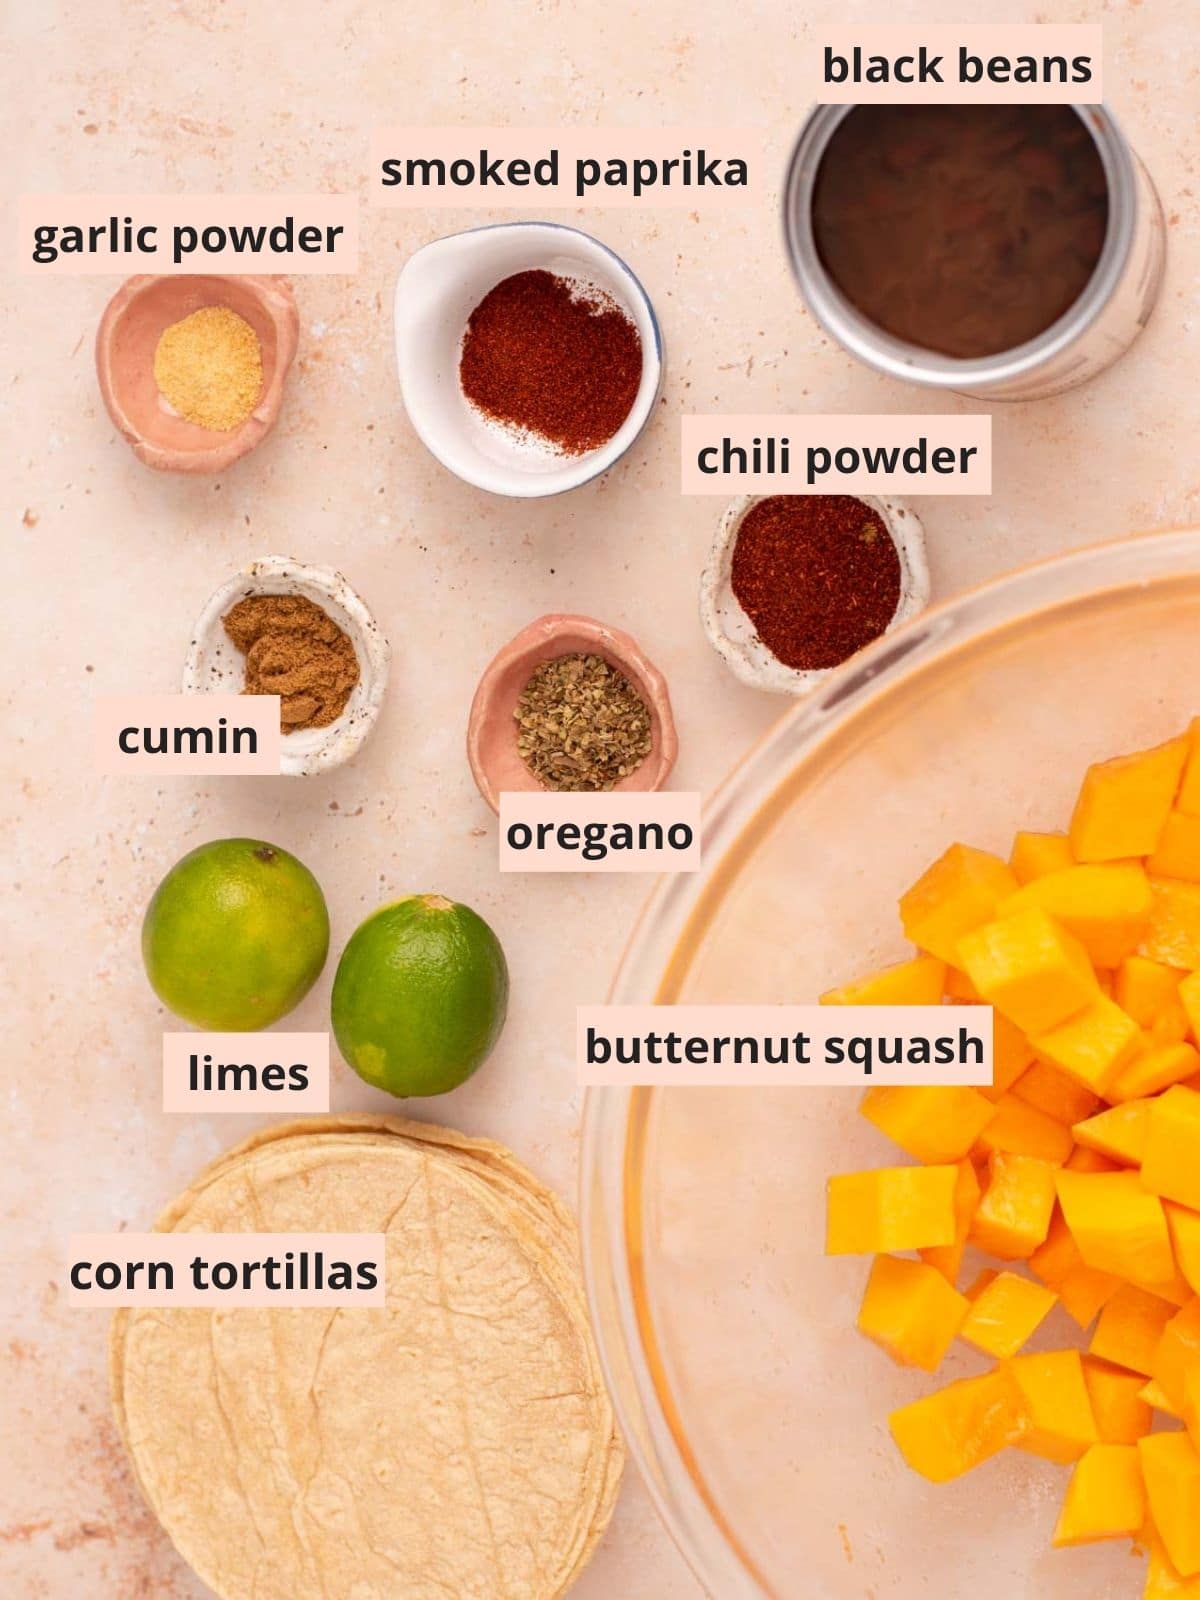 Labeled ingredients used to make butternut squash tacos